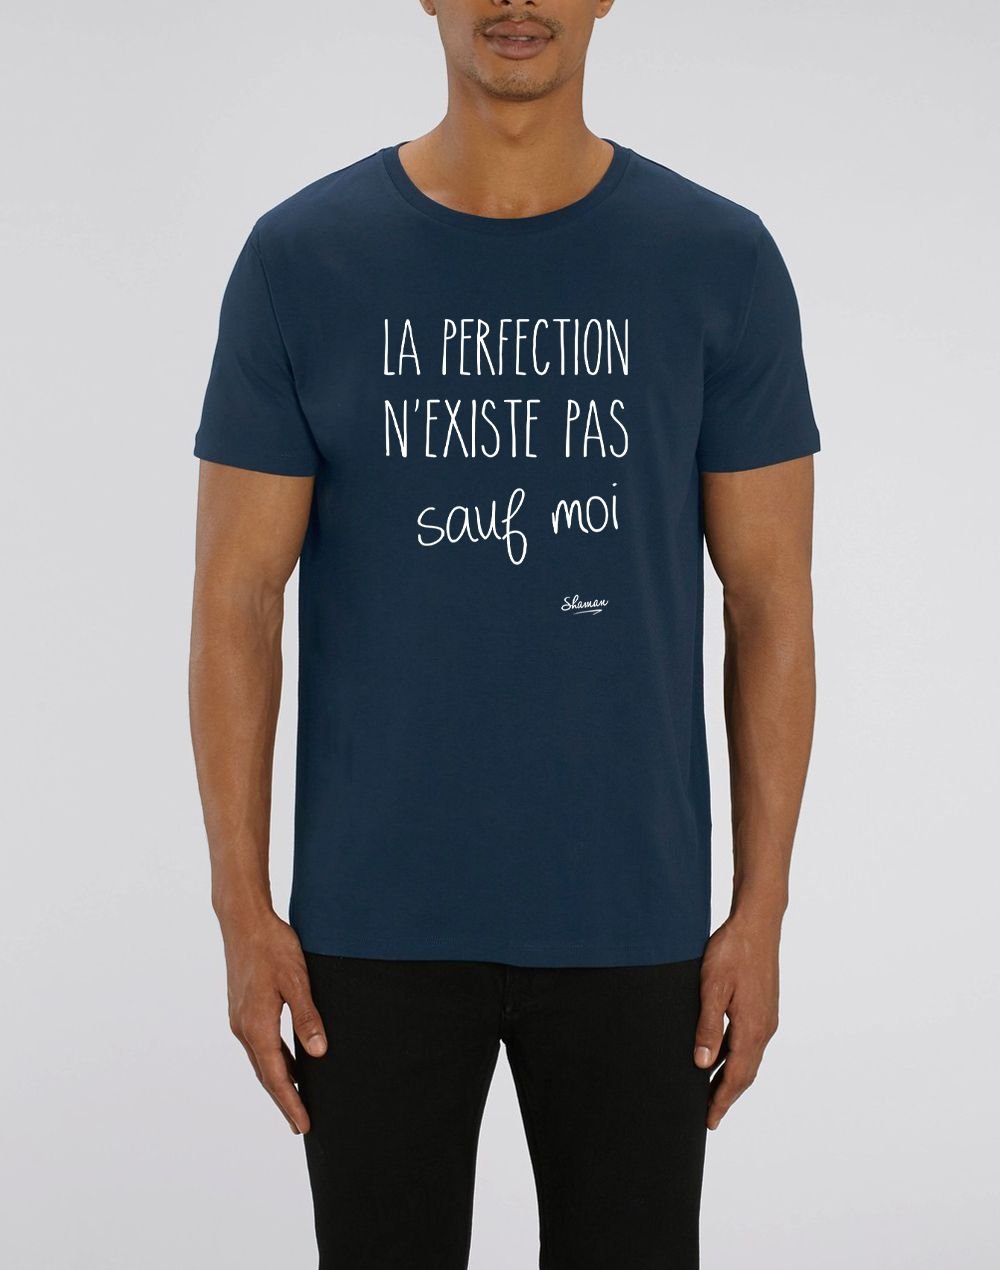 T-shirt humour homme - Perfection